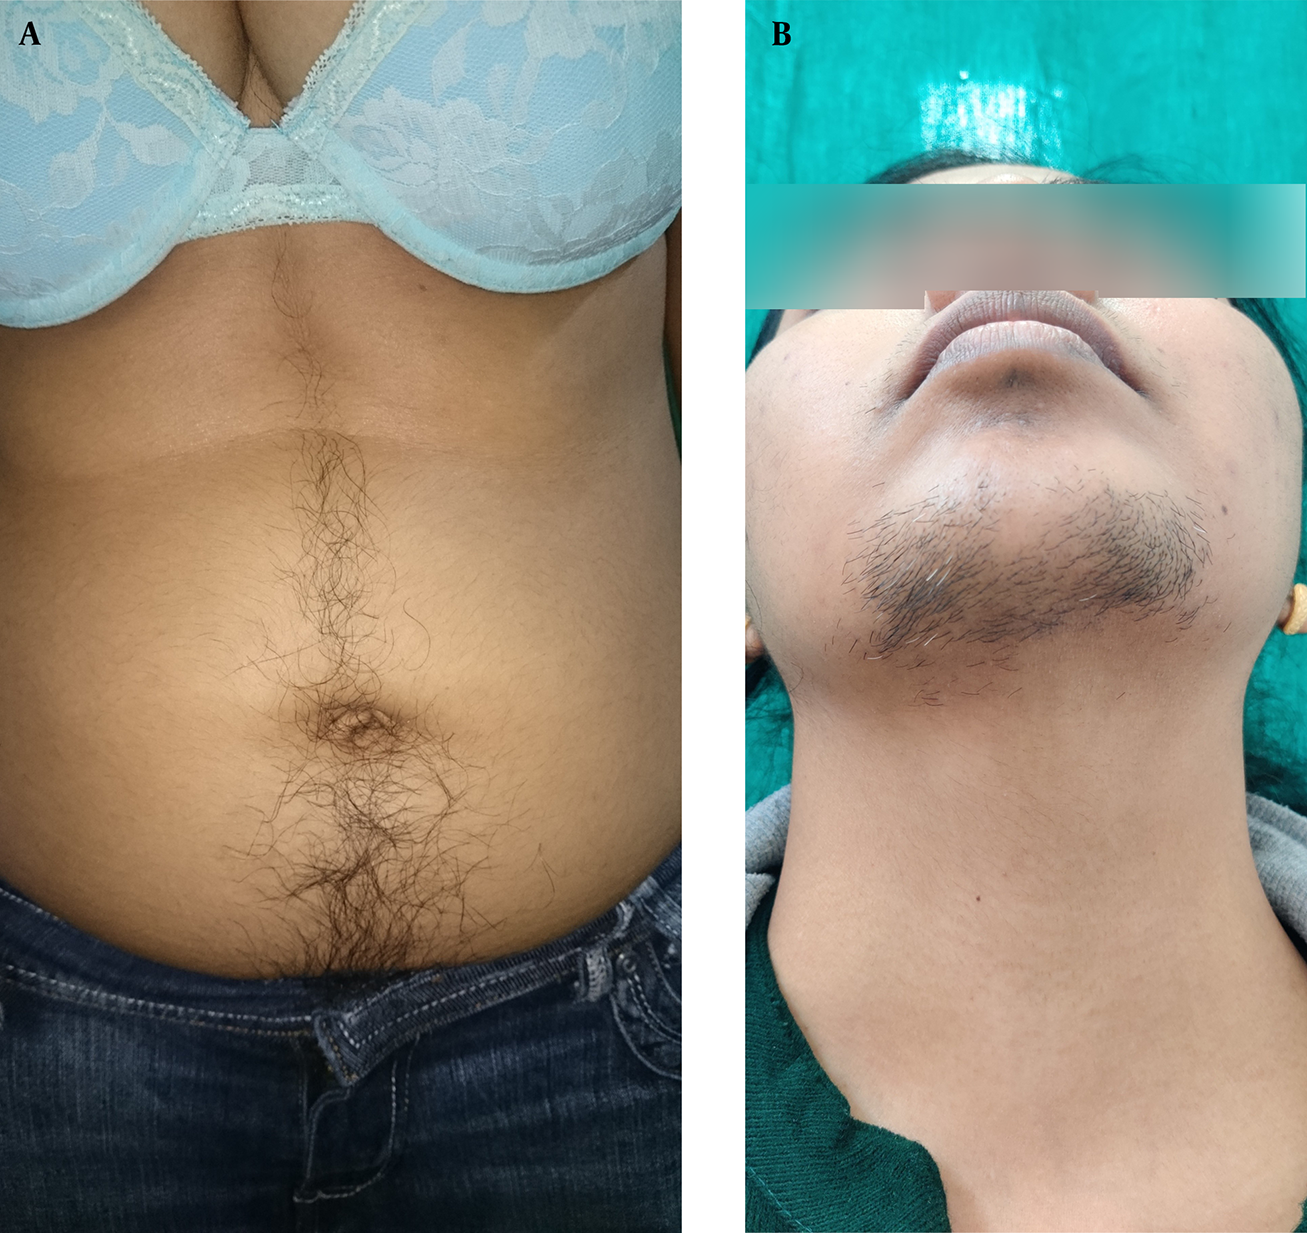 A, Excess of terminal hair in androgen-dependent areas in a female over abdomen; B, Excess of terminal hair in androgen-dependent areas in a female over face.